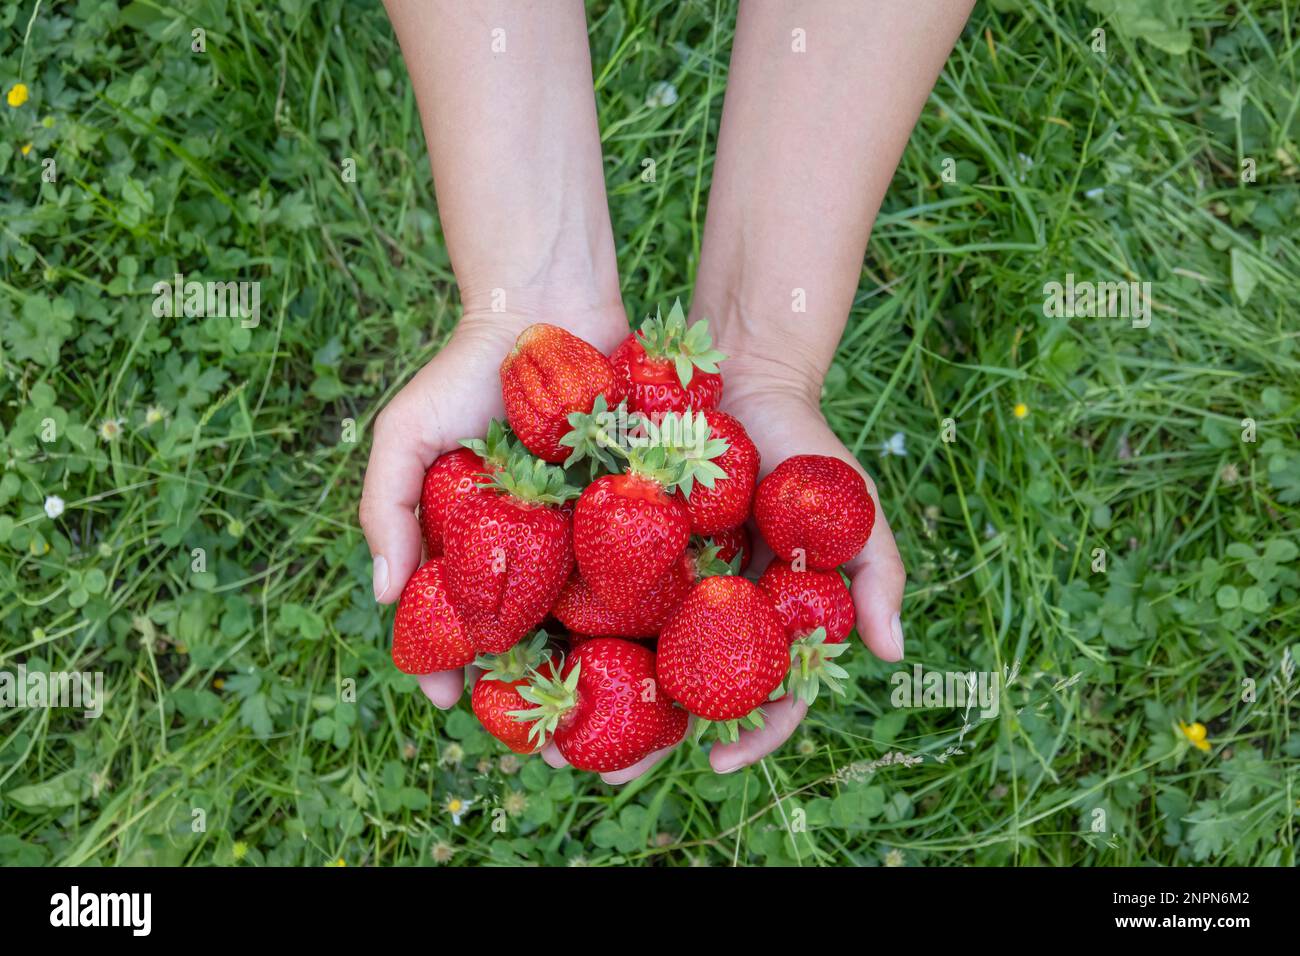 Hands holding a harvest of big fresh strawberries. Handful of fresh red berries Stock Photo